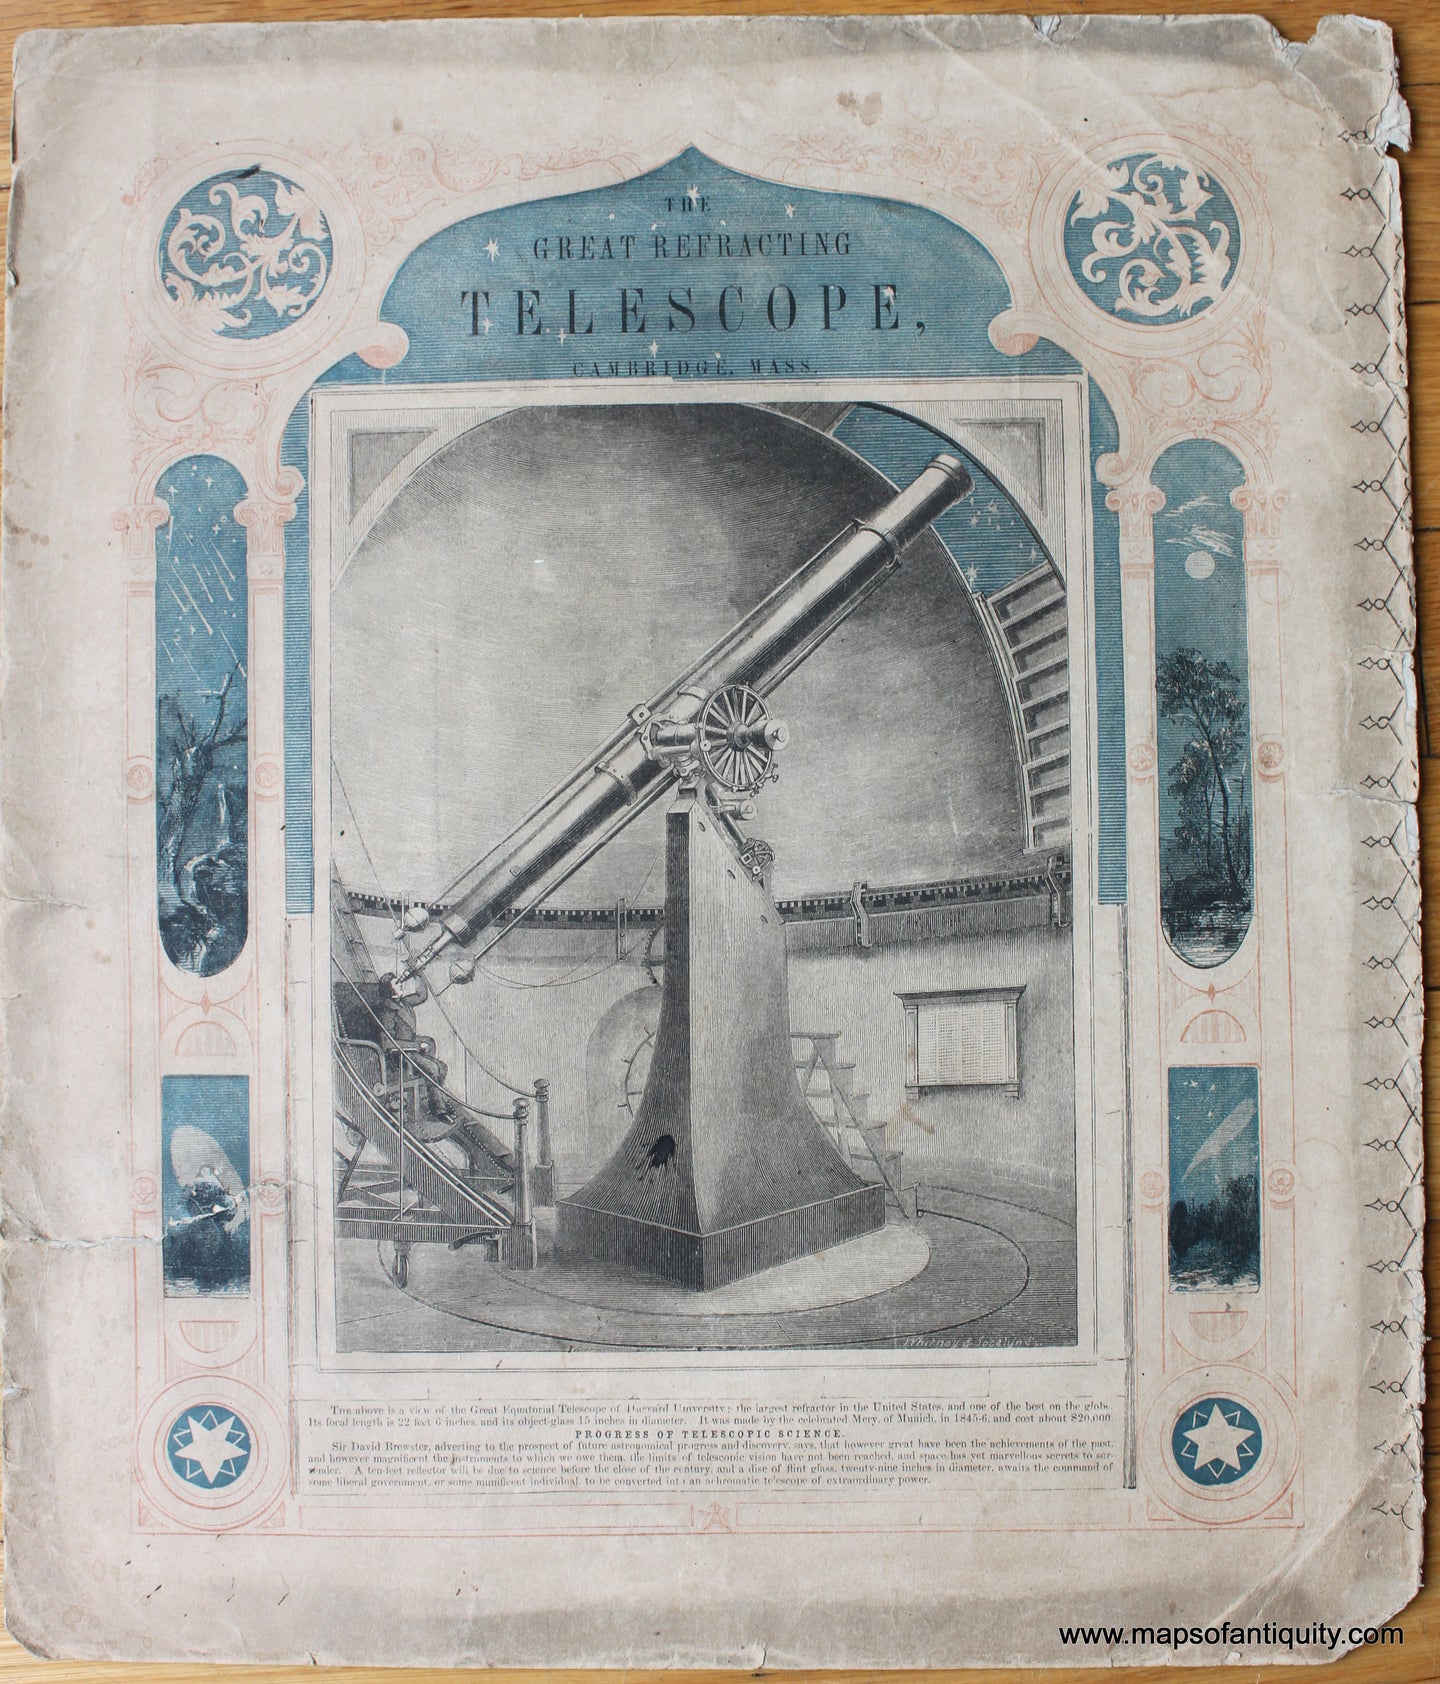 The Great Refracting Telescope of Harvard Antique Print of a huge telescope in an observatory in 1835 from Burritt's Atlas of the Heavens